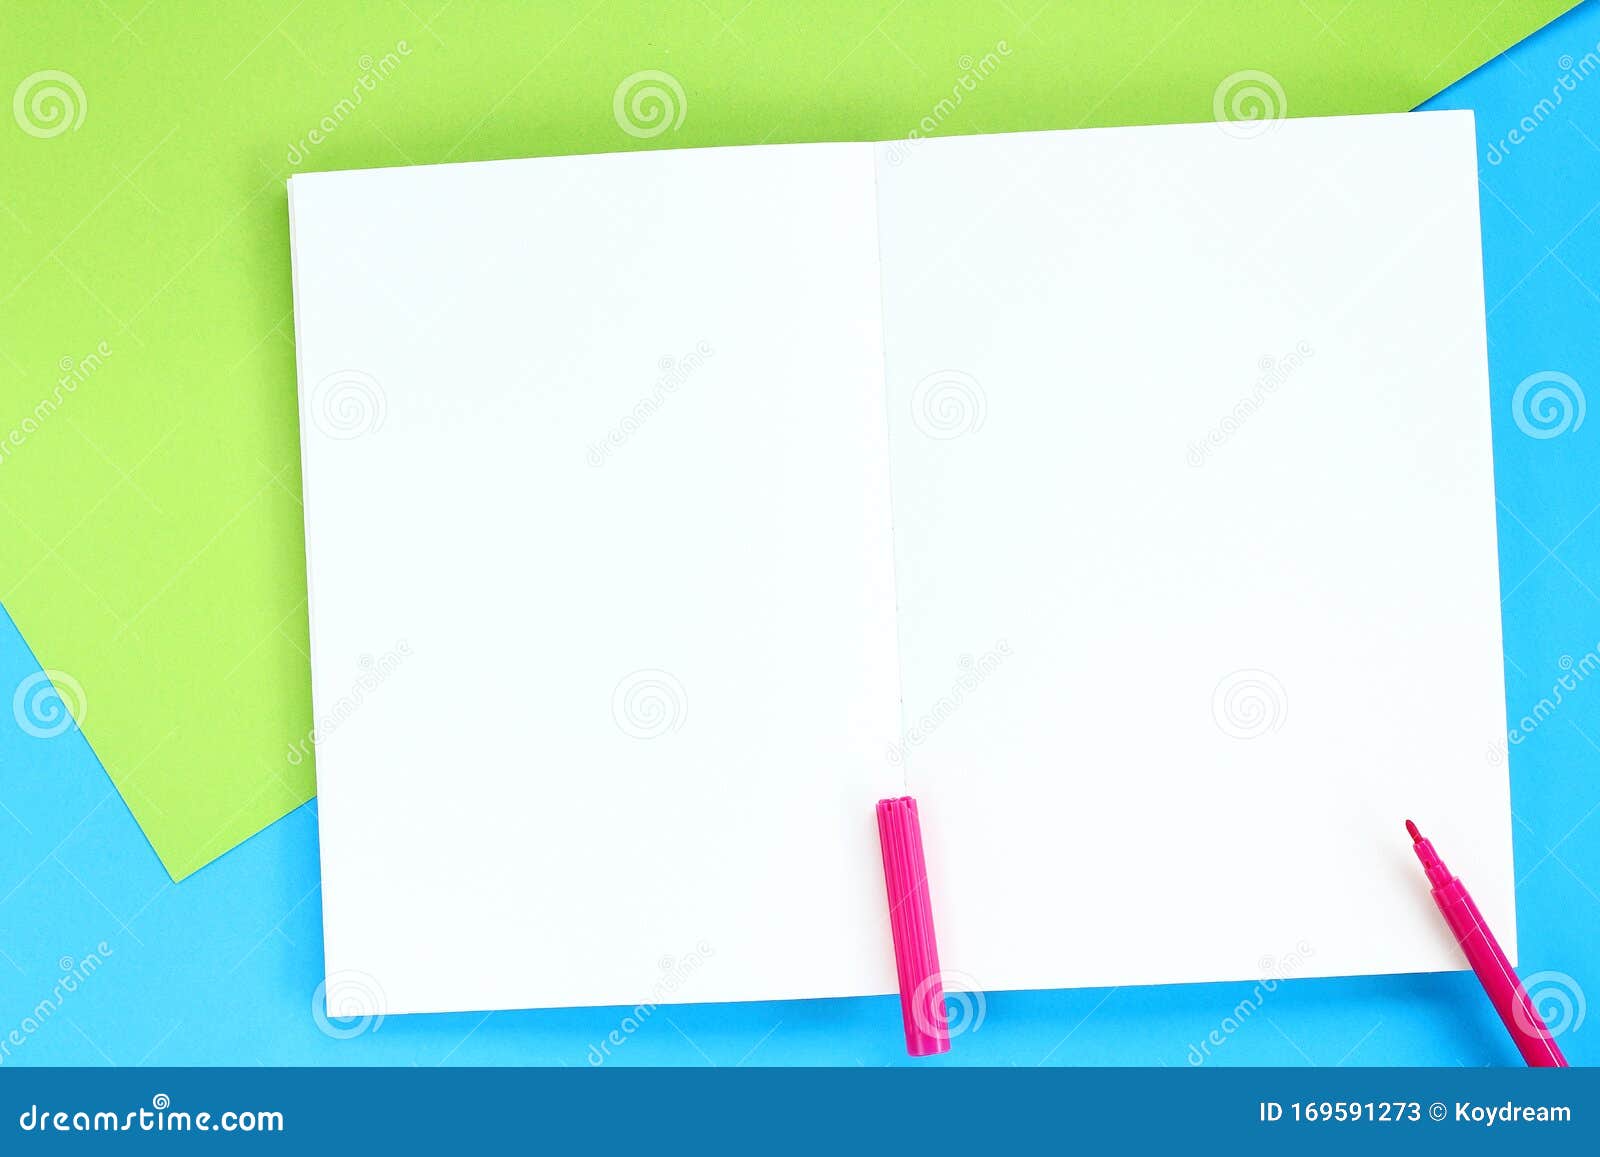 Paper and Pen Color for Writing Stock Image - Image of color, background:  169591273